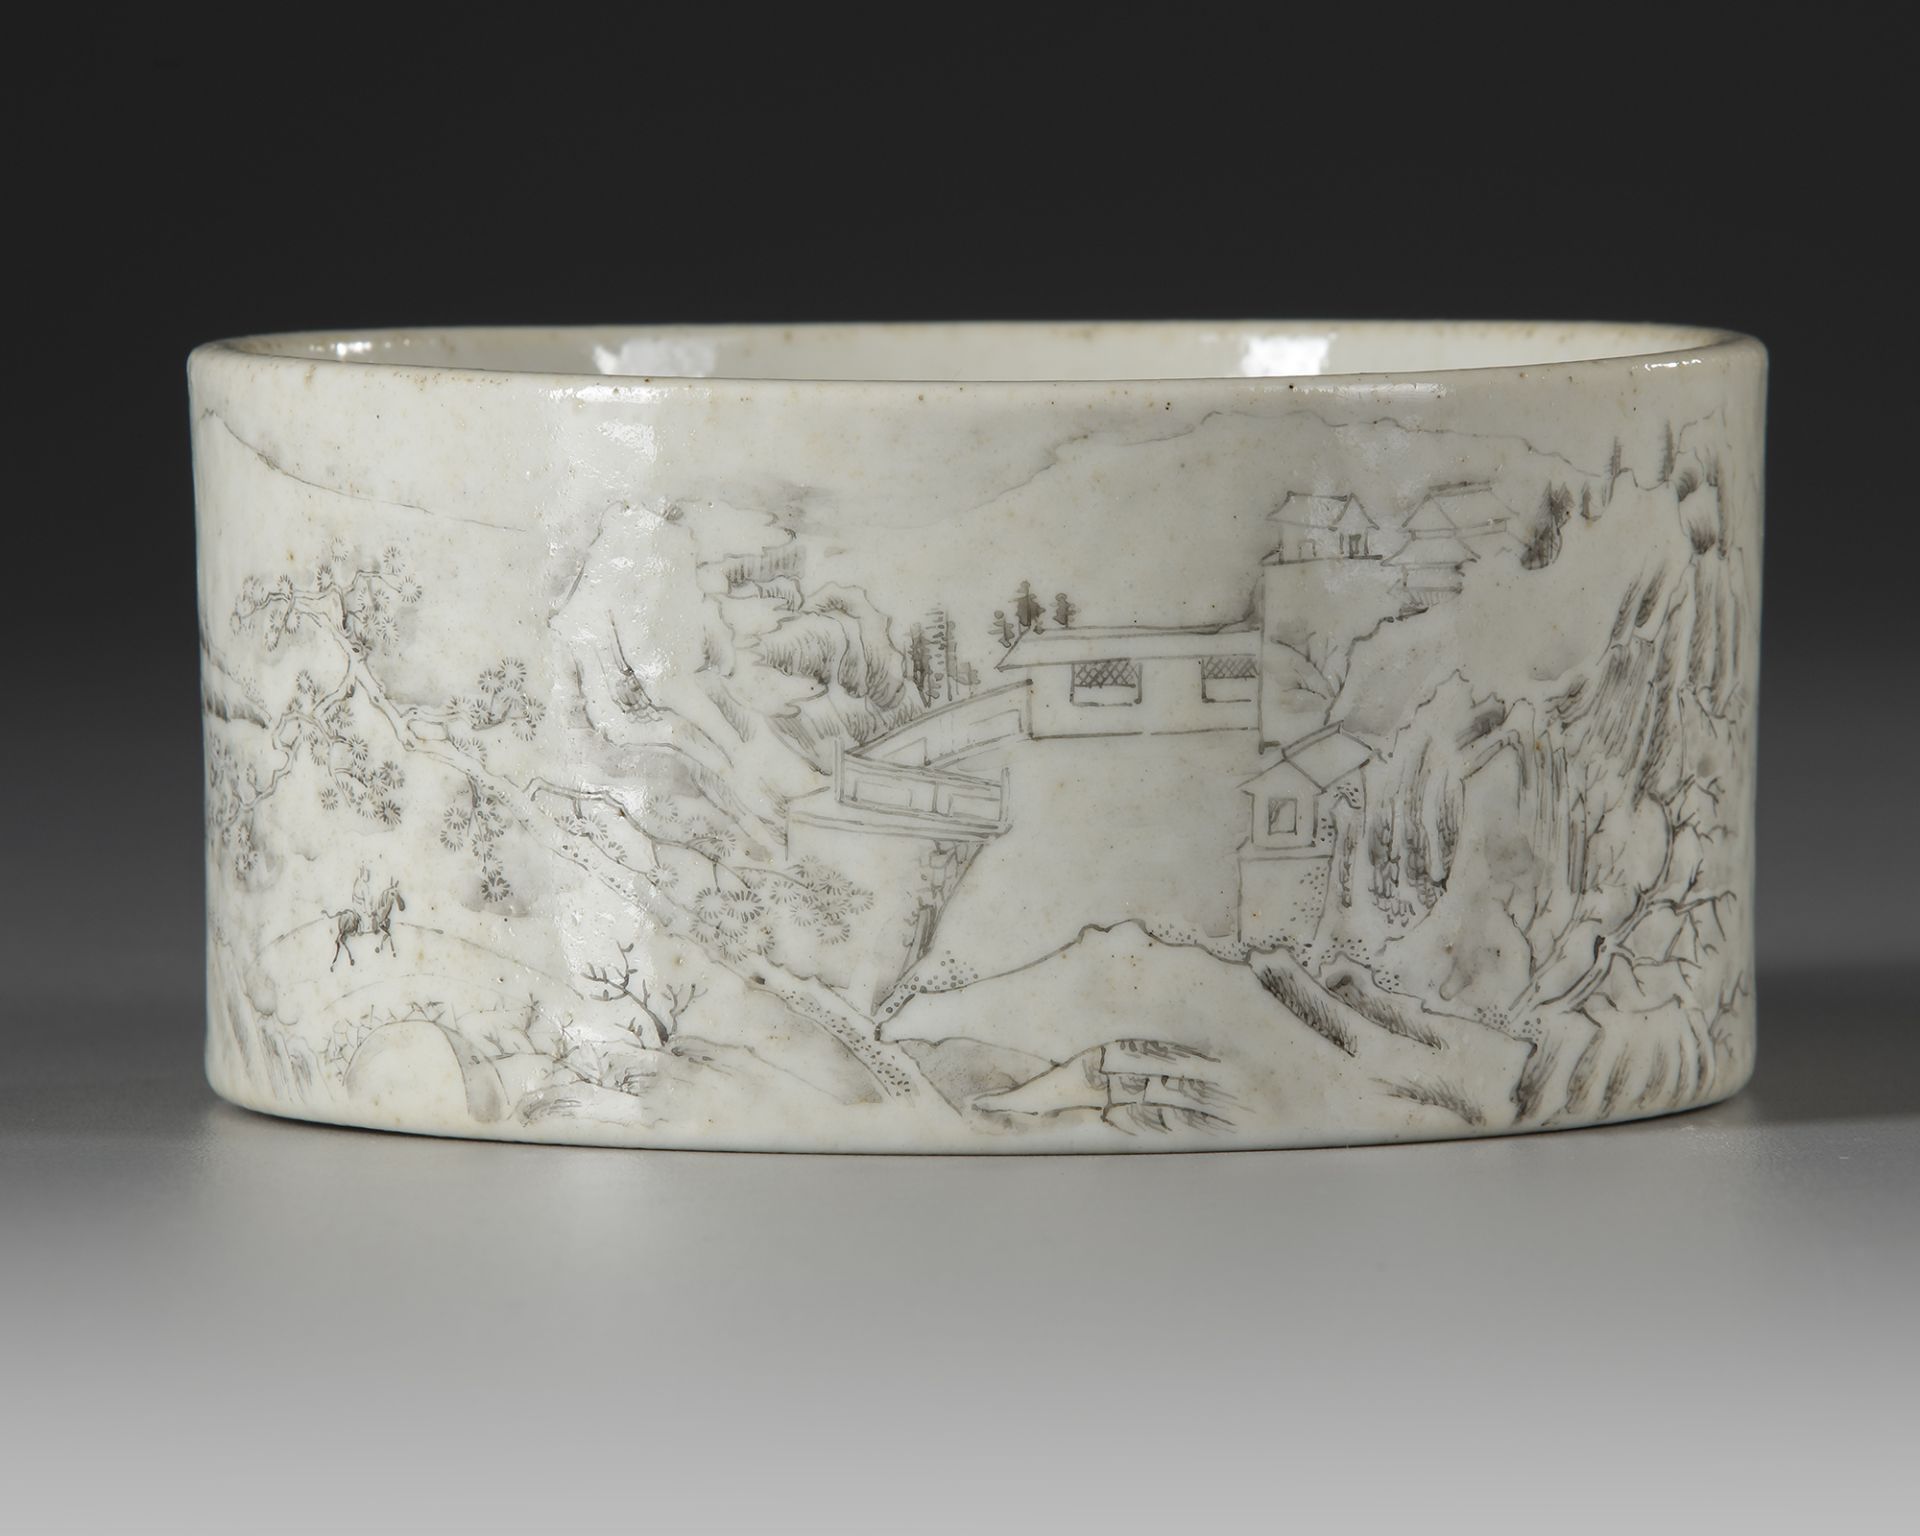 A CHINESE GRISAILLE LANDSCAPE BRUSH POT, REPUBLIC PERIOD, 20TH CENTURY